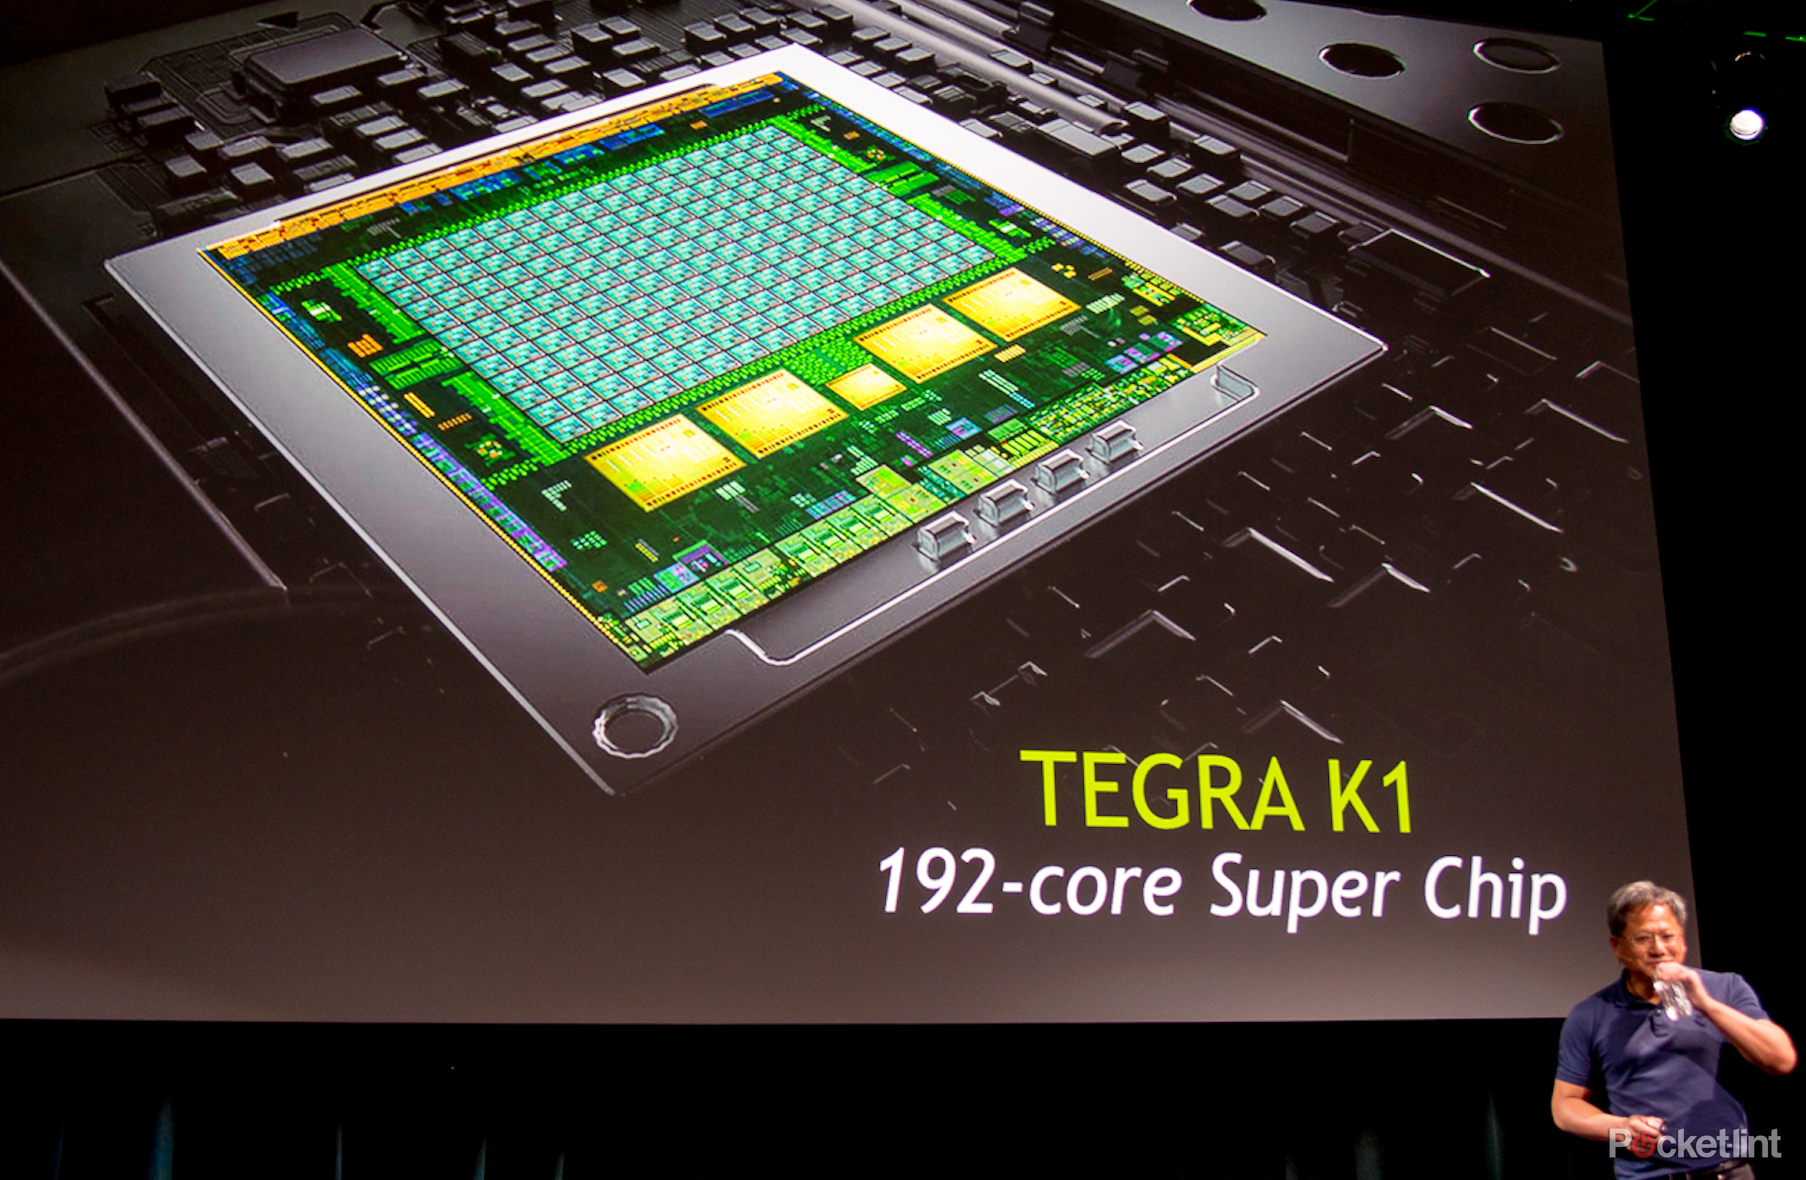 nvidia tegra k1 mobile processor comes with 192 cuda cores beats ps3 and xbox 360 in performance image 1